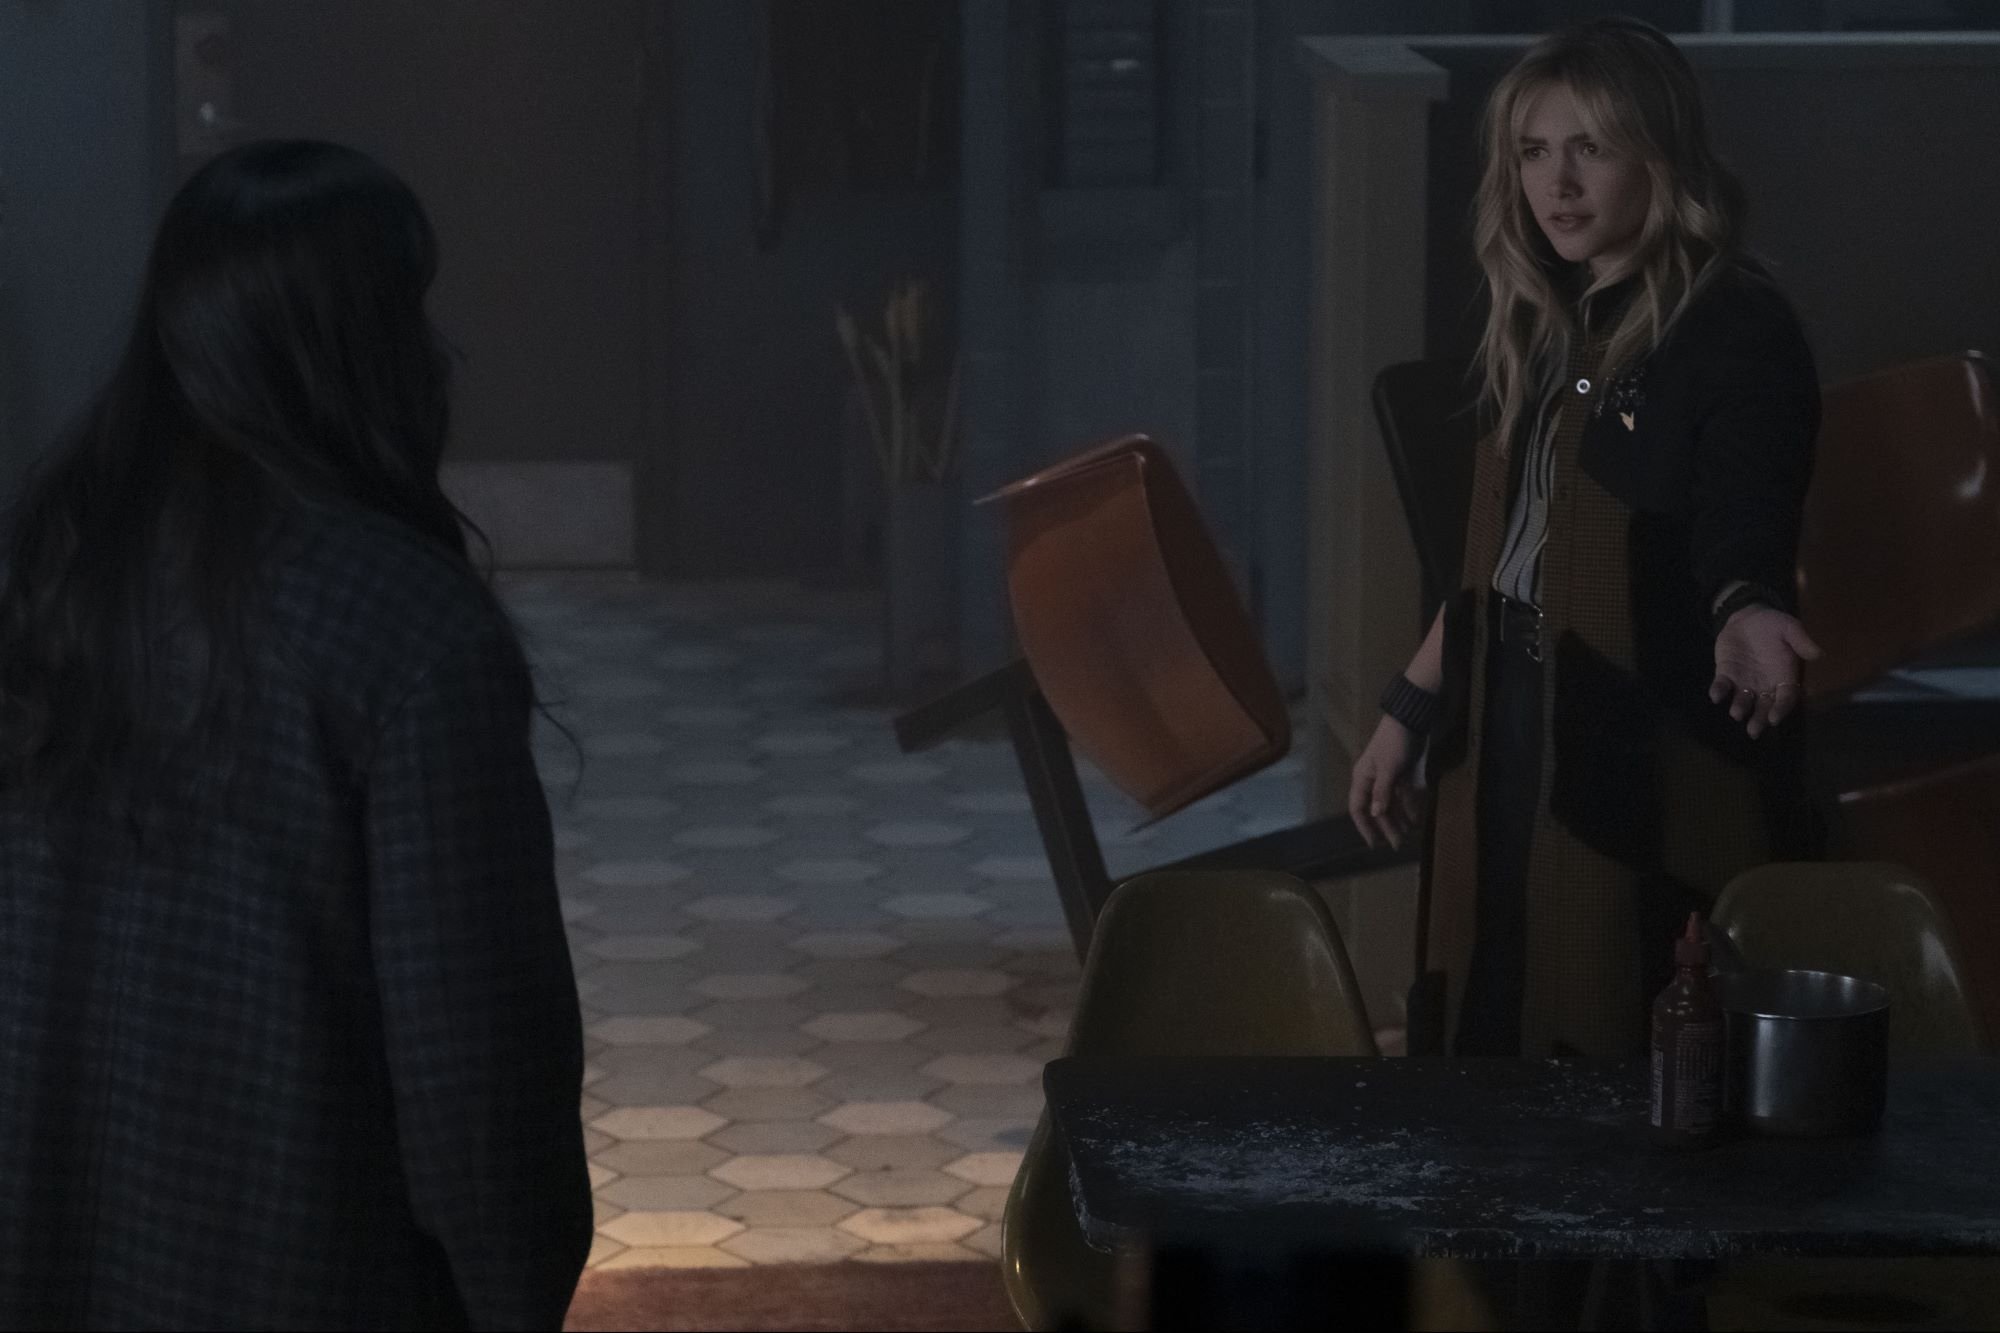 'Hawkeye' stars Hailee Steinfeld and Florence Pugh, who fans want to return for a season 2, act out a scene in Kate's apartment. Kate wears a dark purple plaid coat. Yelena wears a black and brown coat.